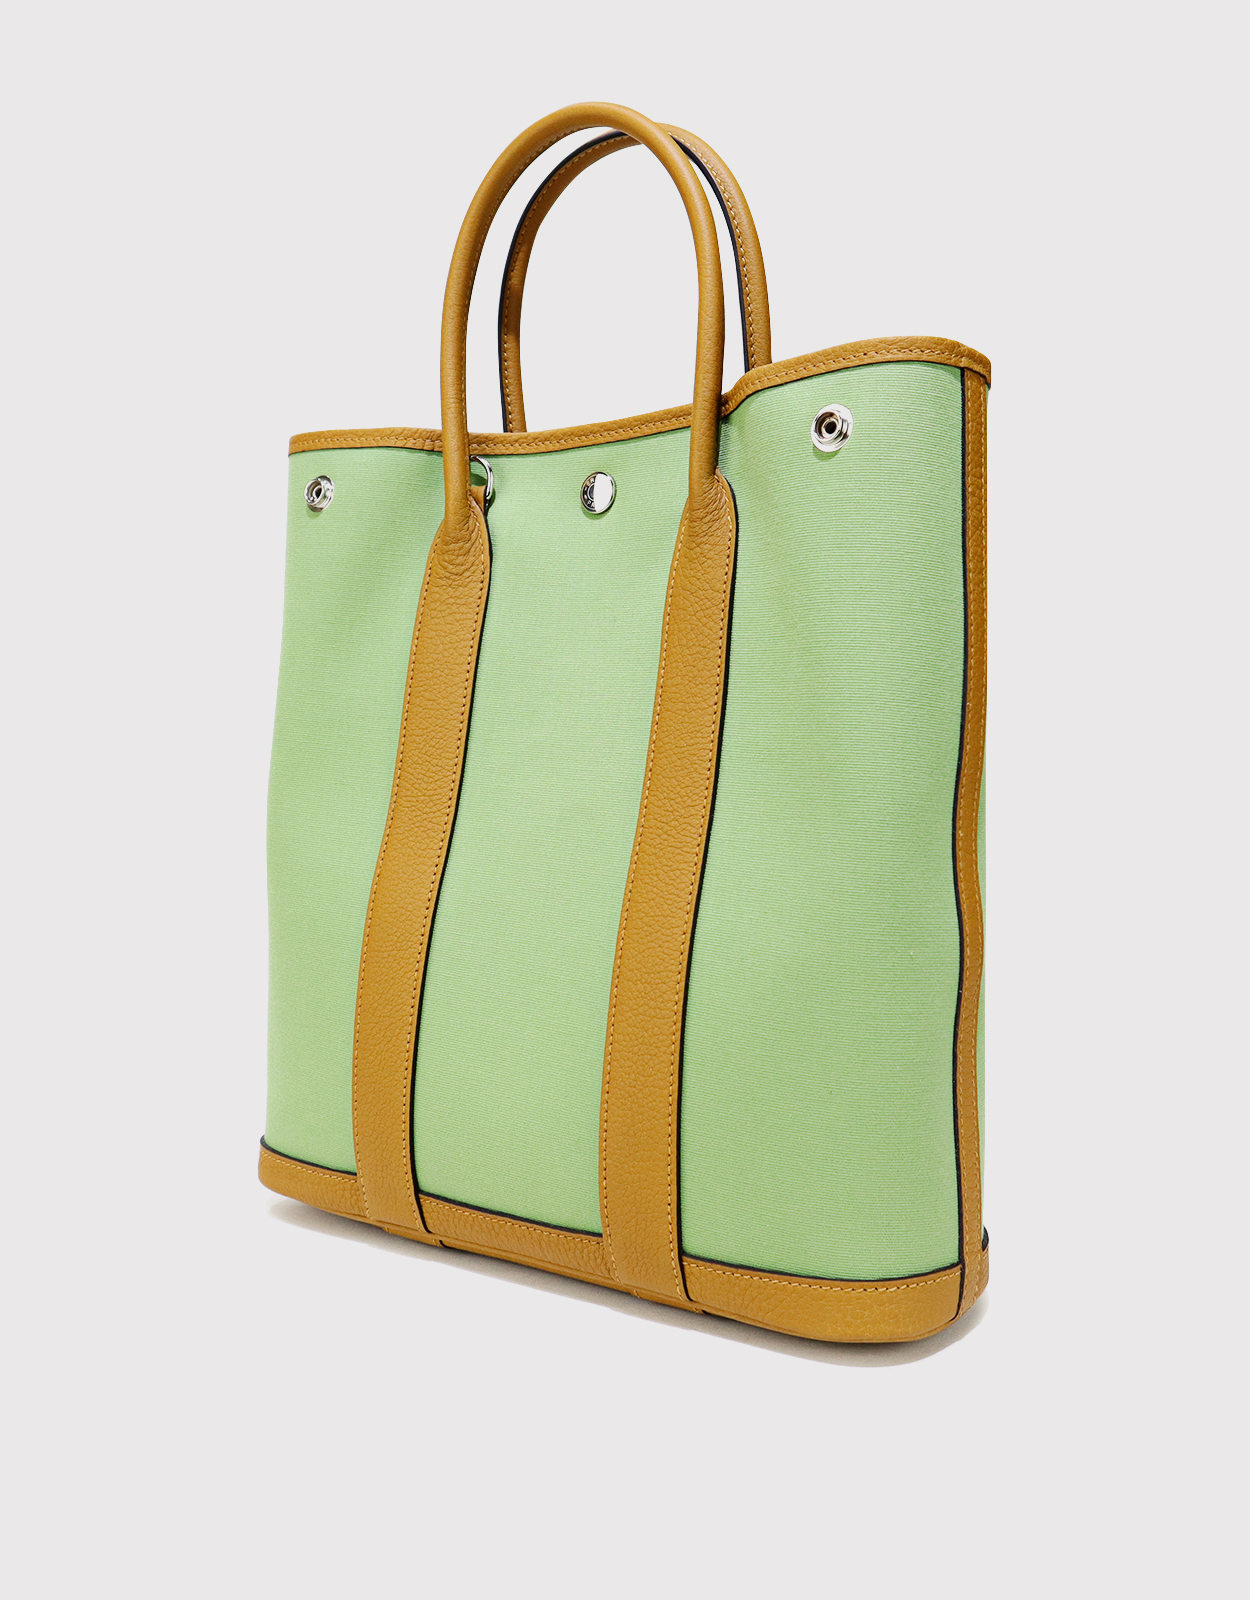 Hermes Garden Party 36 Tote Bag In Green Almond Negonda Leather, Shw